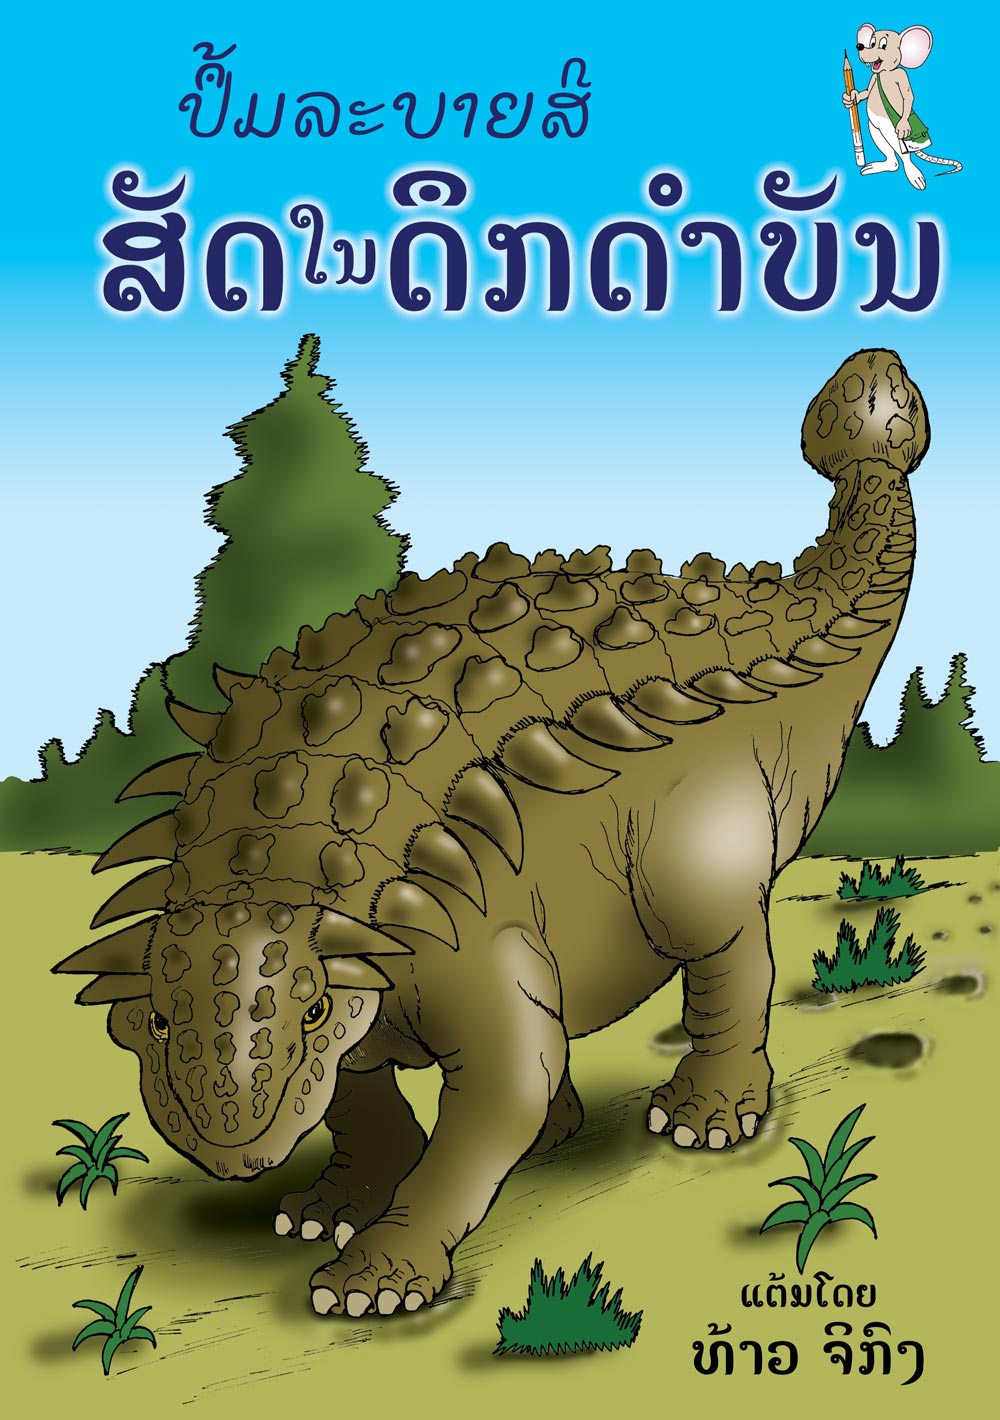 Prehistoric Life Coloring Book large book cover, published in Lao and English